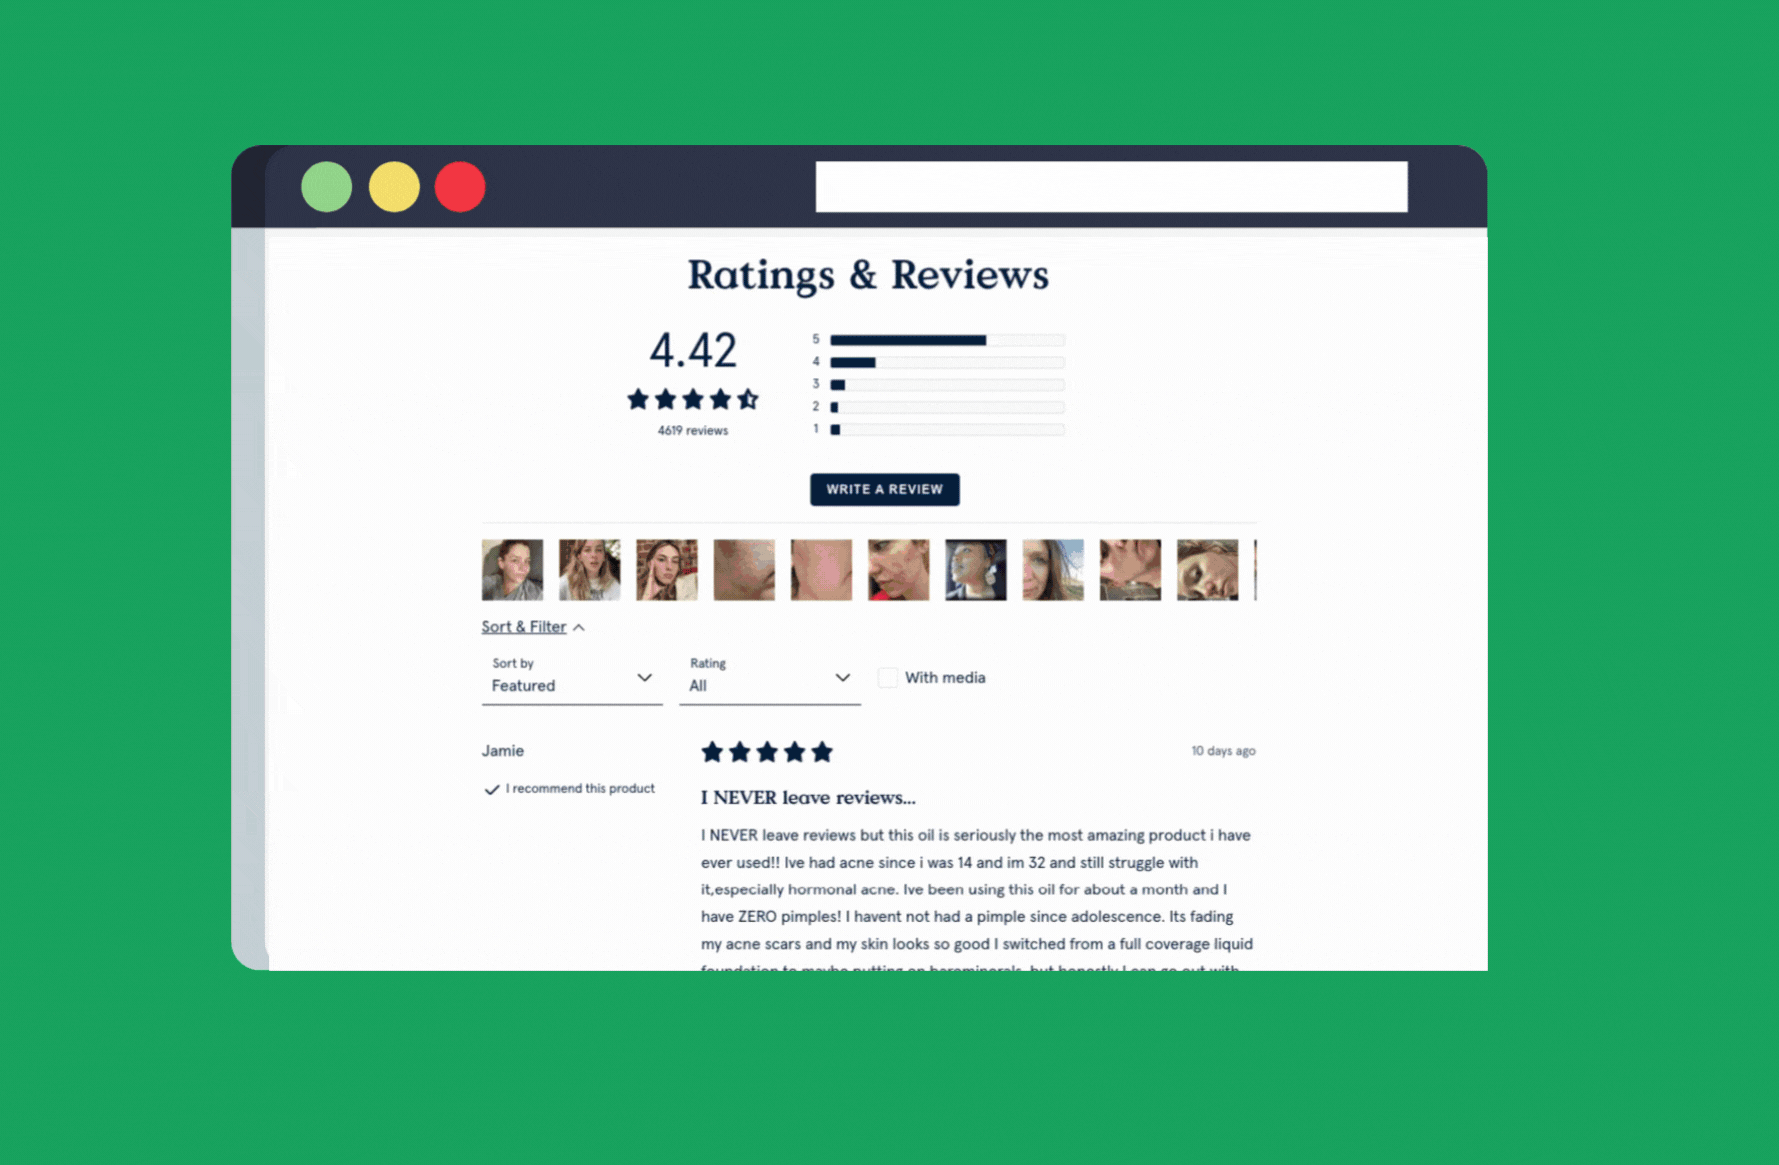 3 Things to Consider When Adding Reviews to Your Website